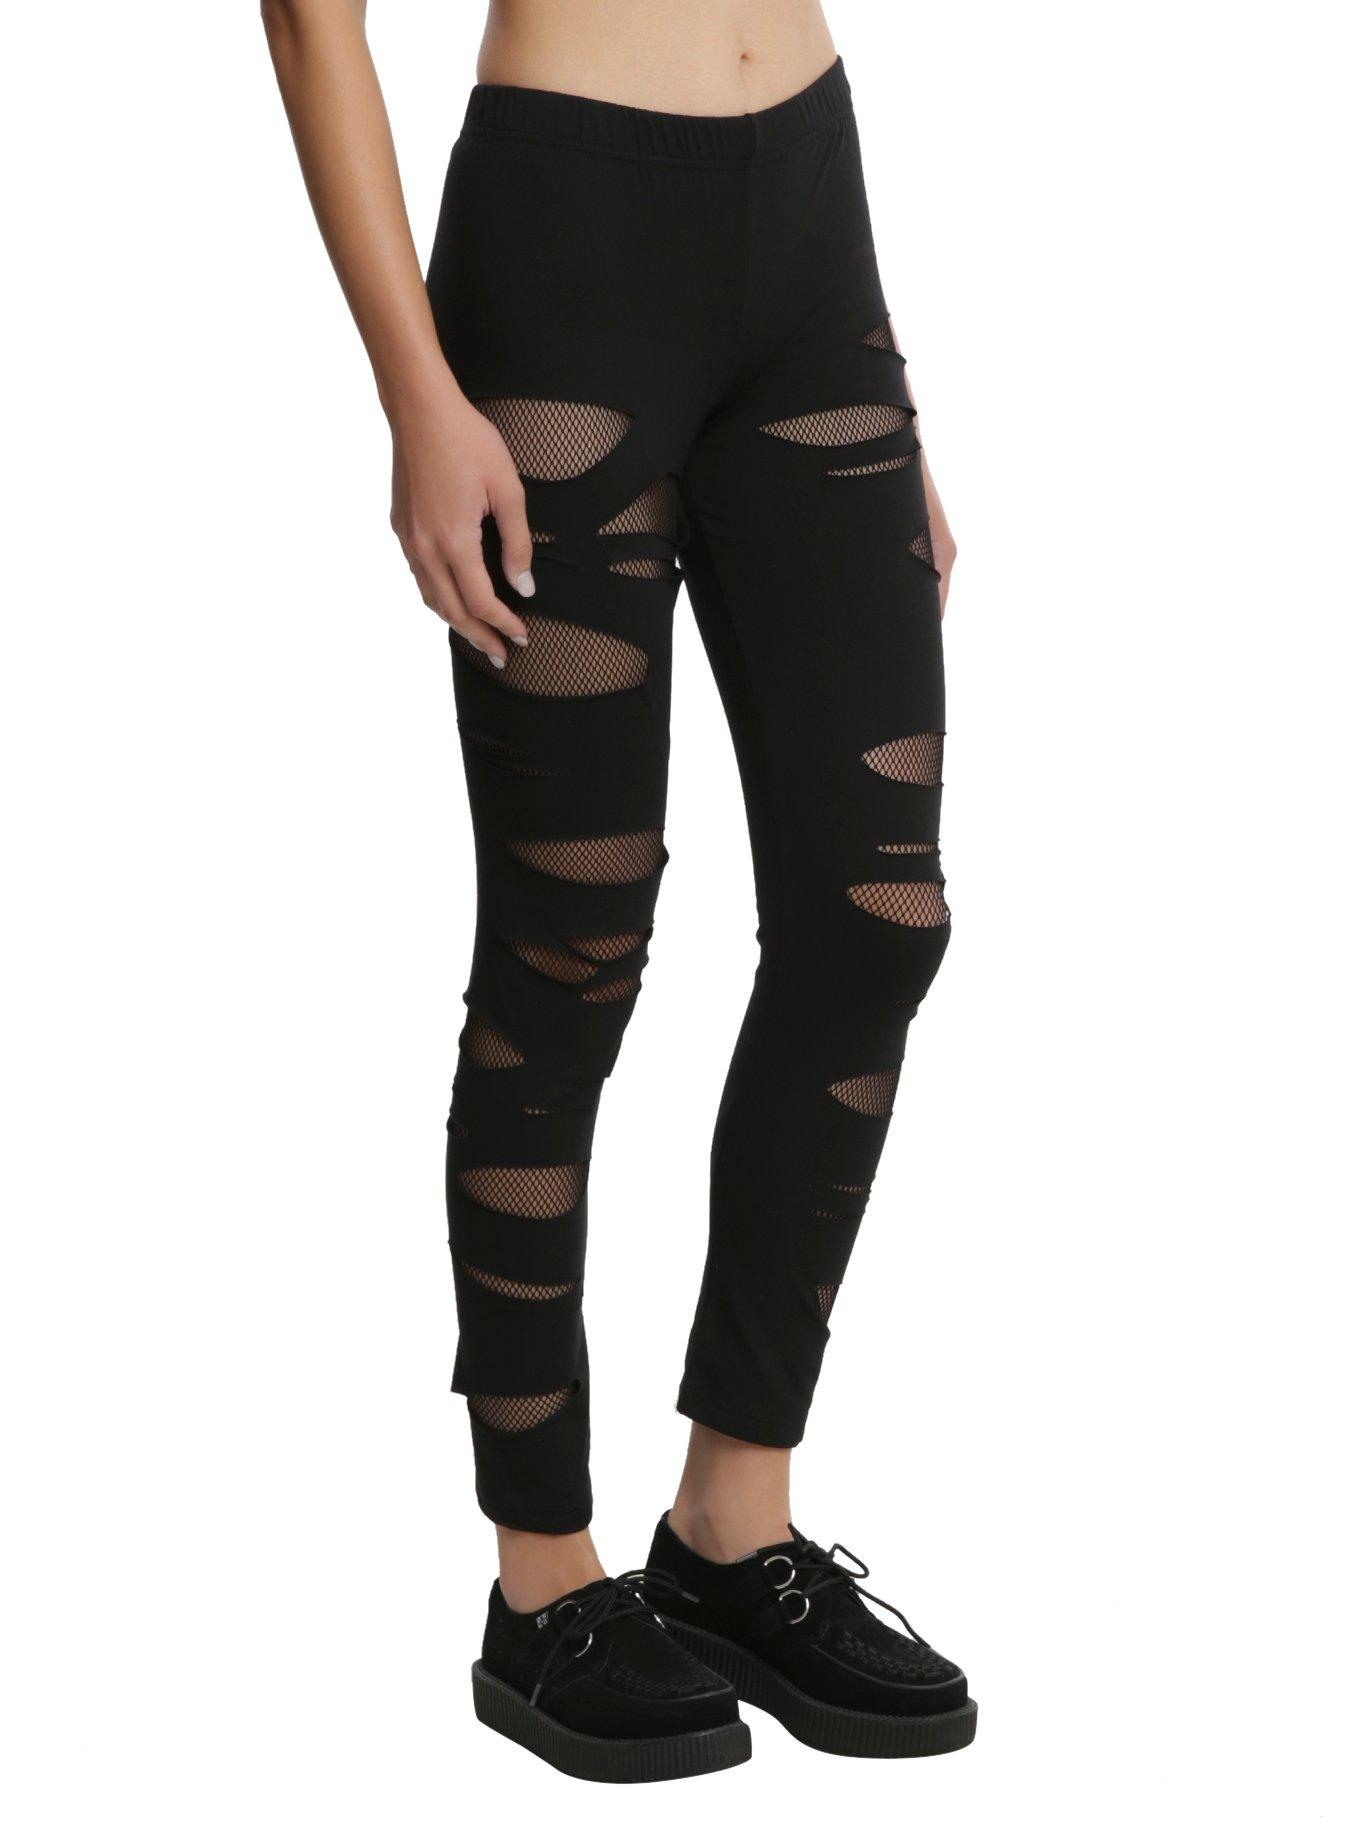 Womens Leggings Black Shredded Leggings and Tights Cut Out // Sexy